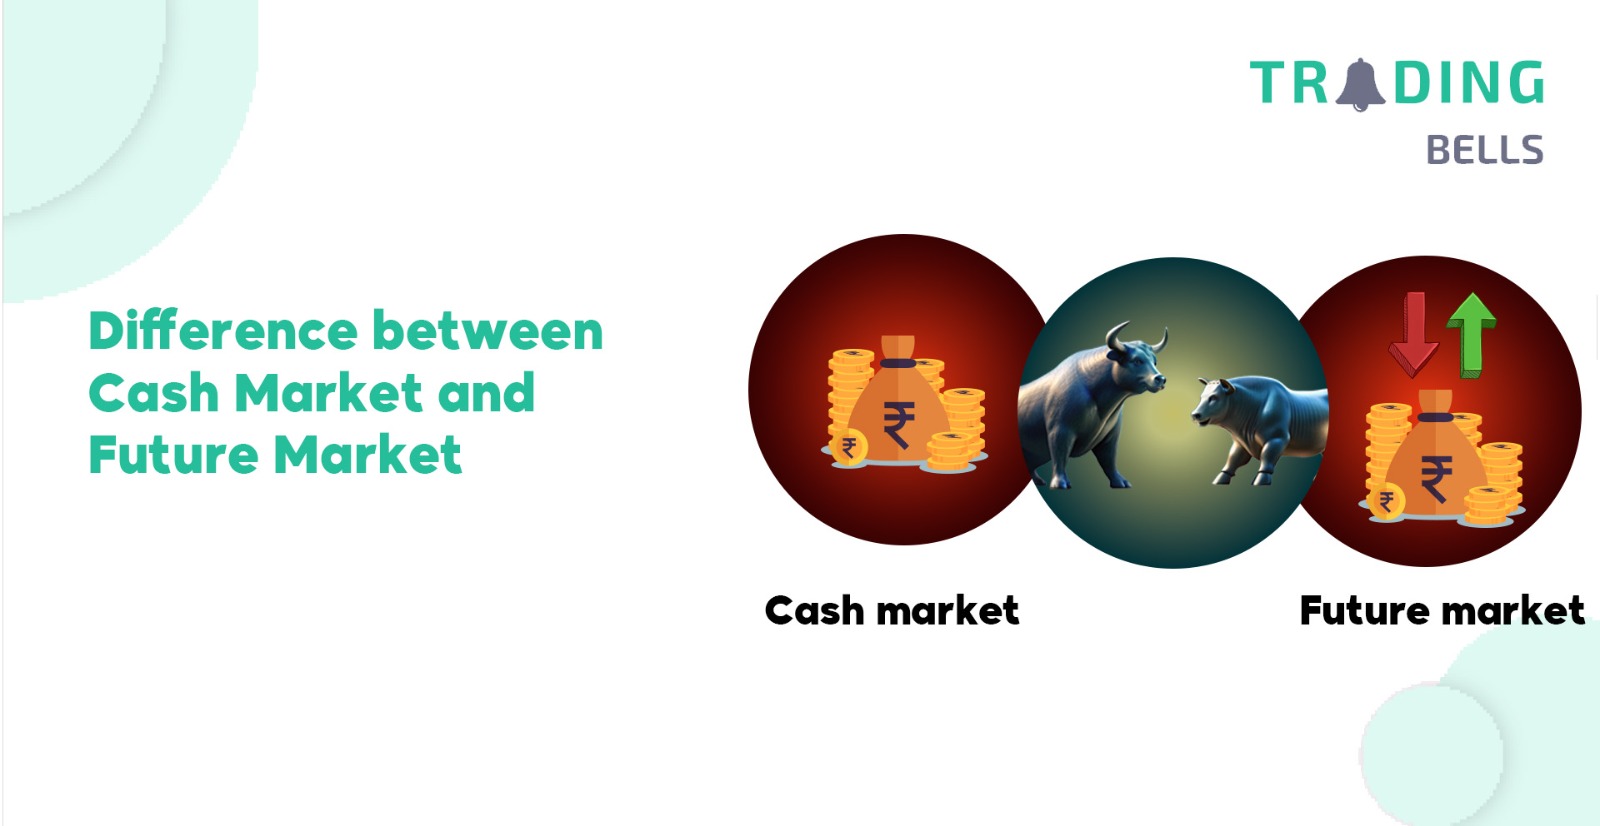 Difference between the Cash Market and the Future Market